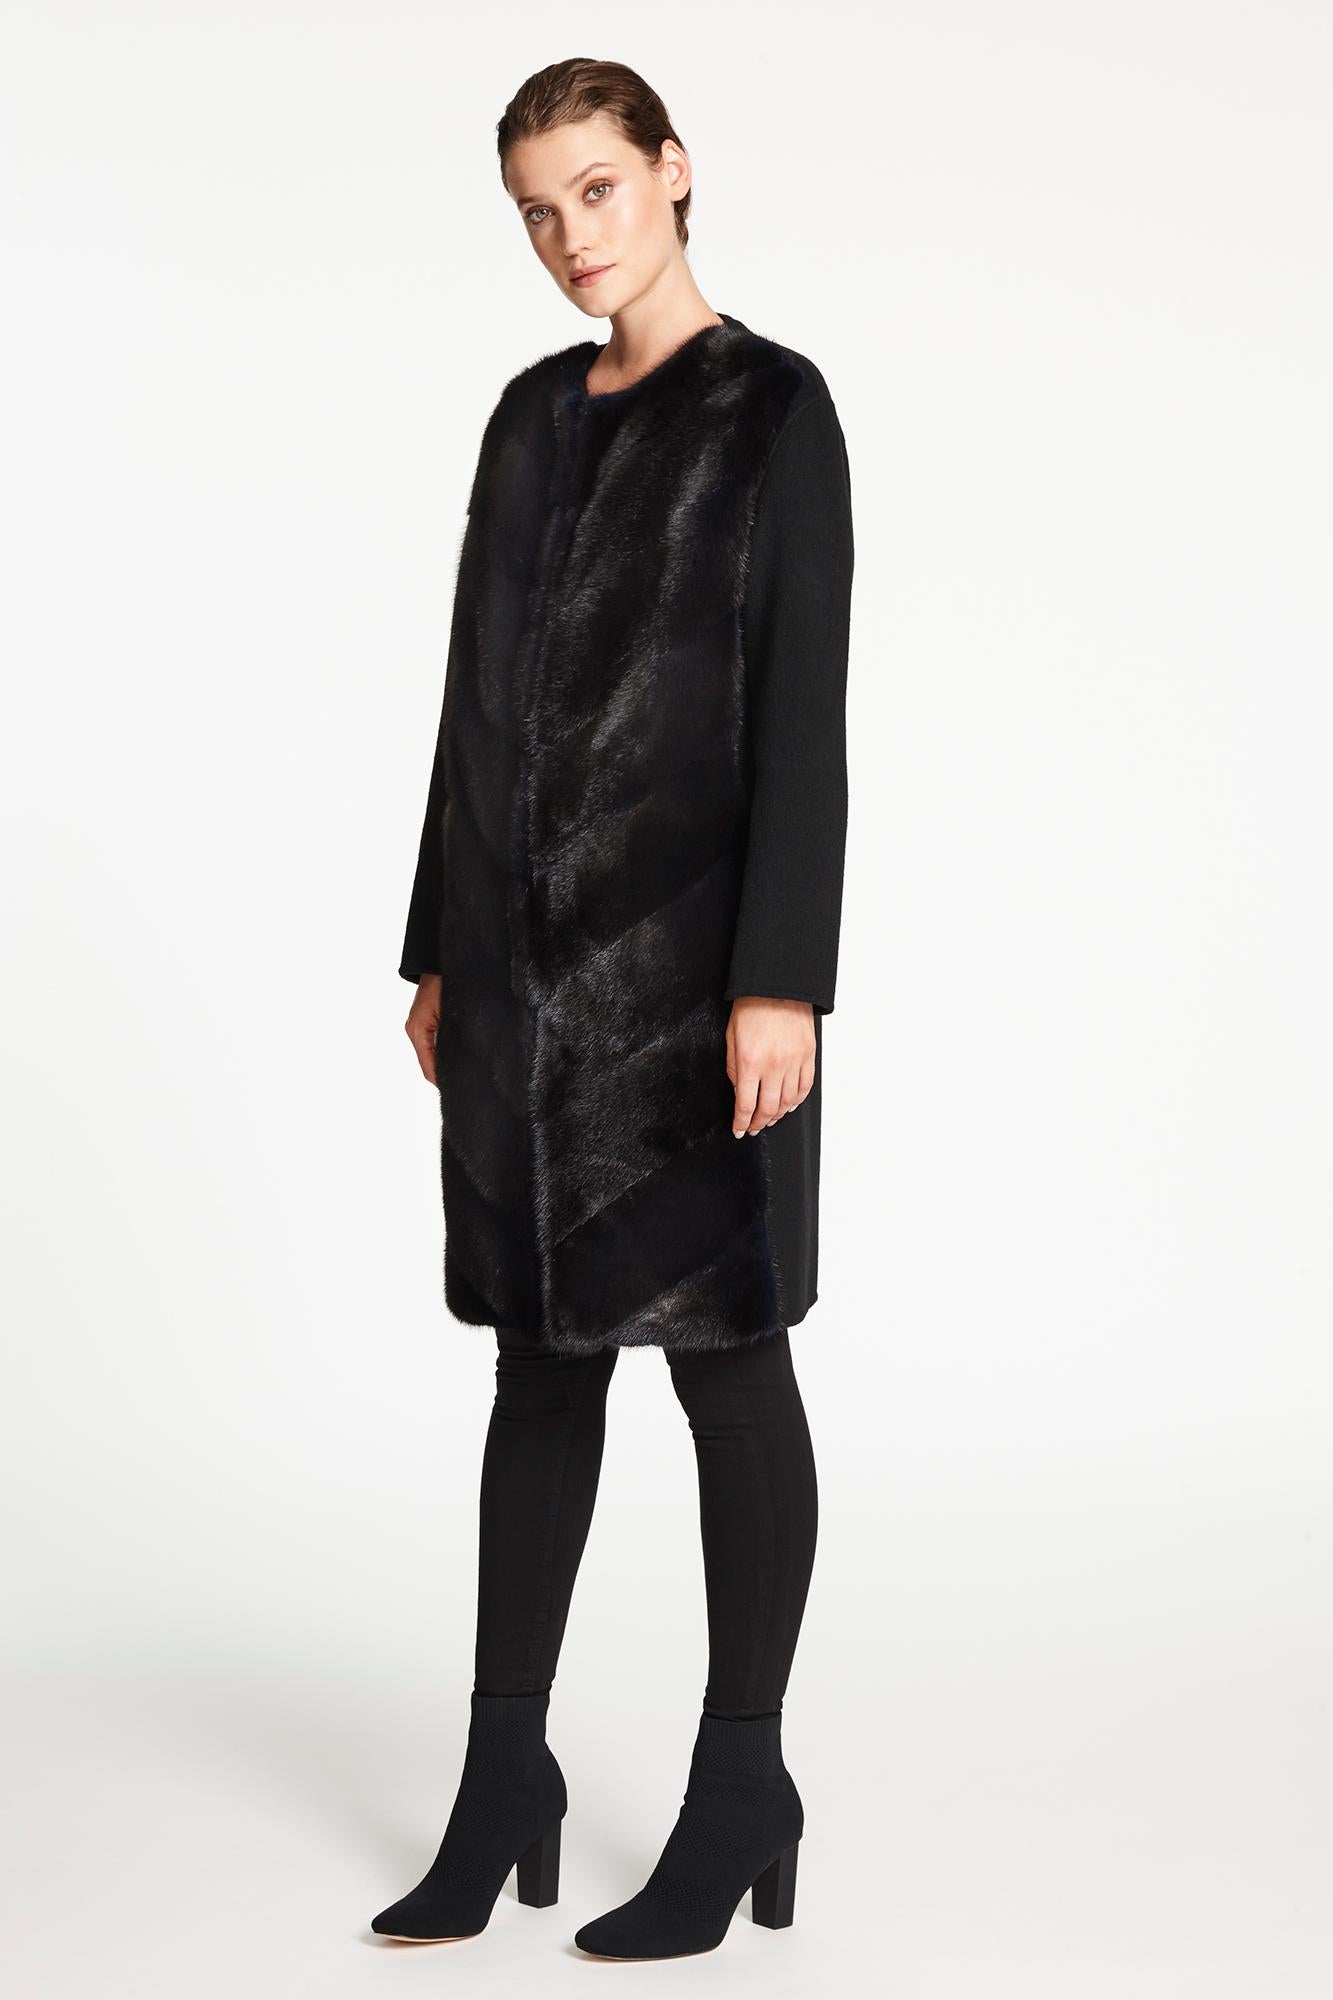 Collarless Coat Cashmere and in Navy Black Mink Fur 3